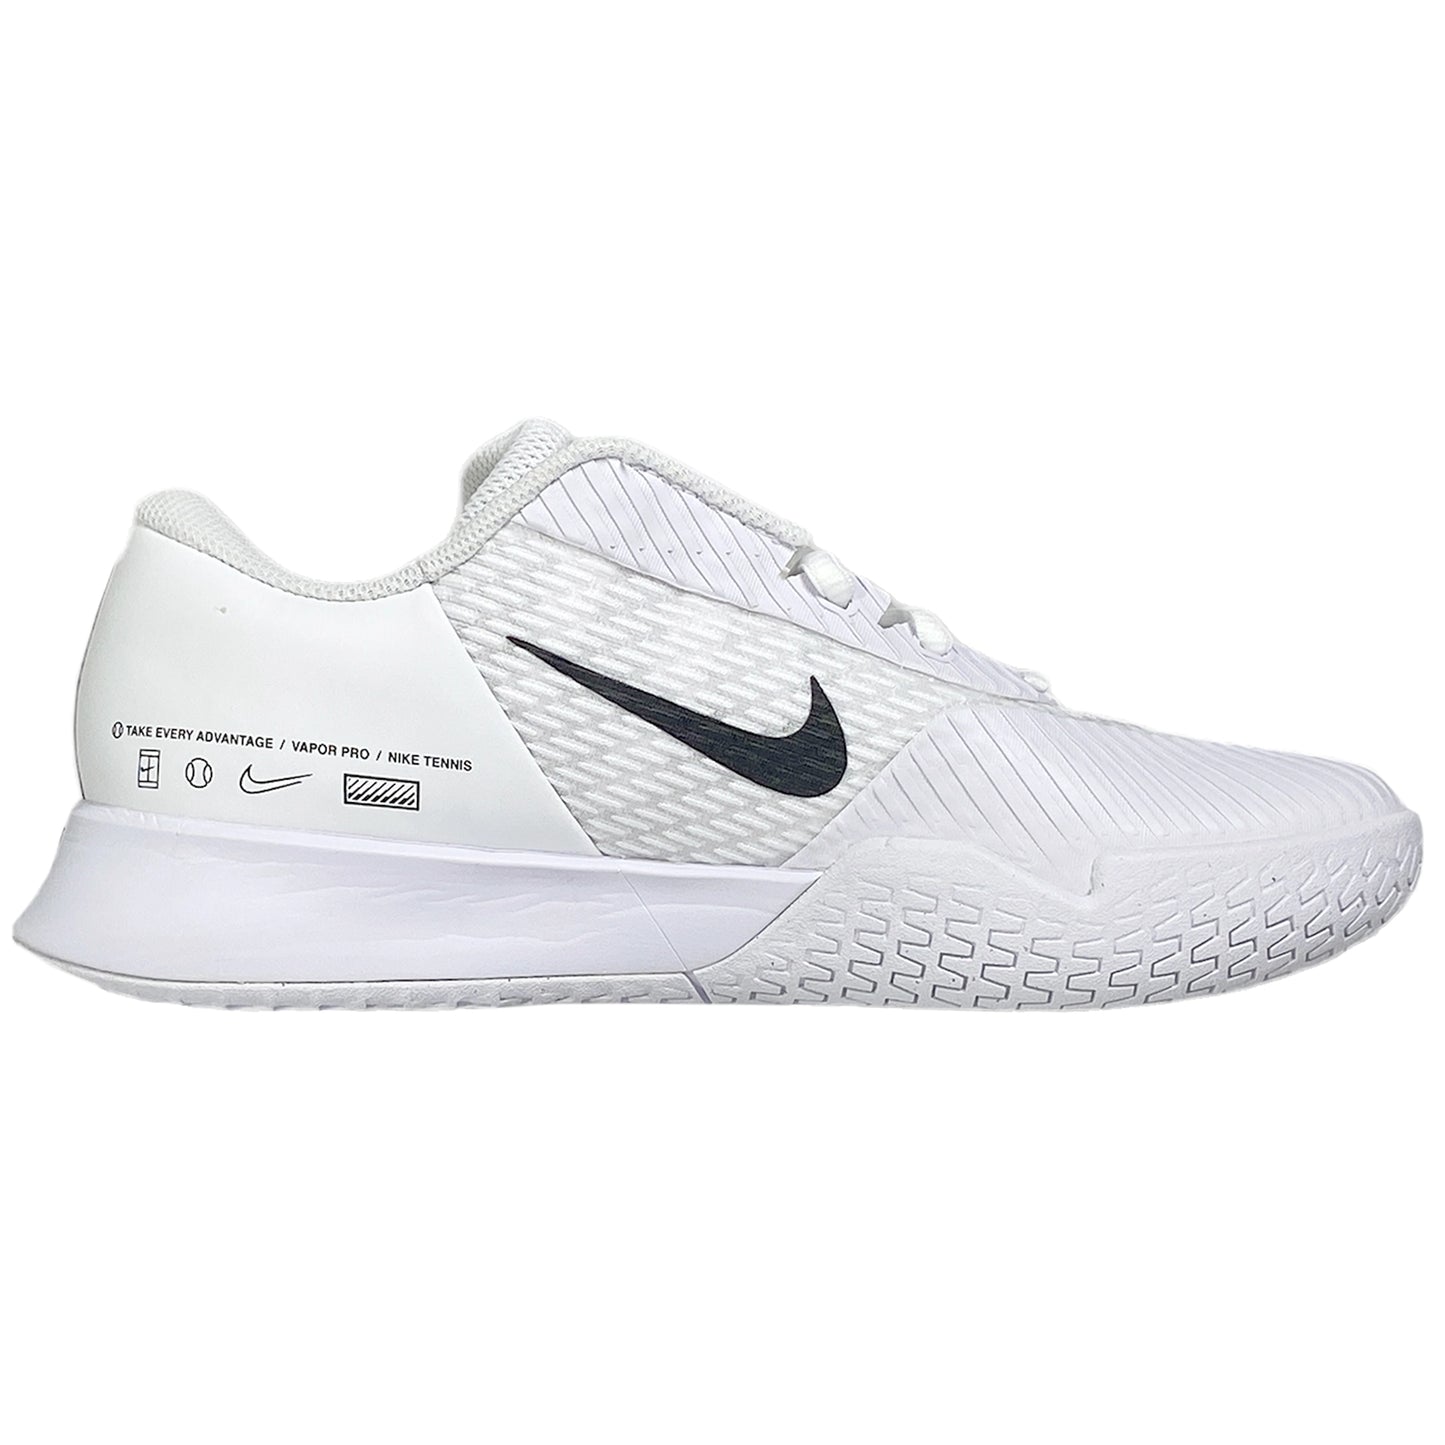 Buy Nike Air Zoom Vapor Pro 2 Chaussures Toutes Surfaces Hommes